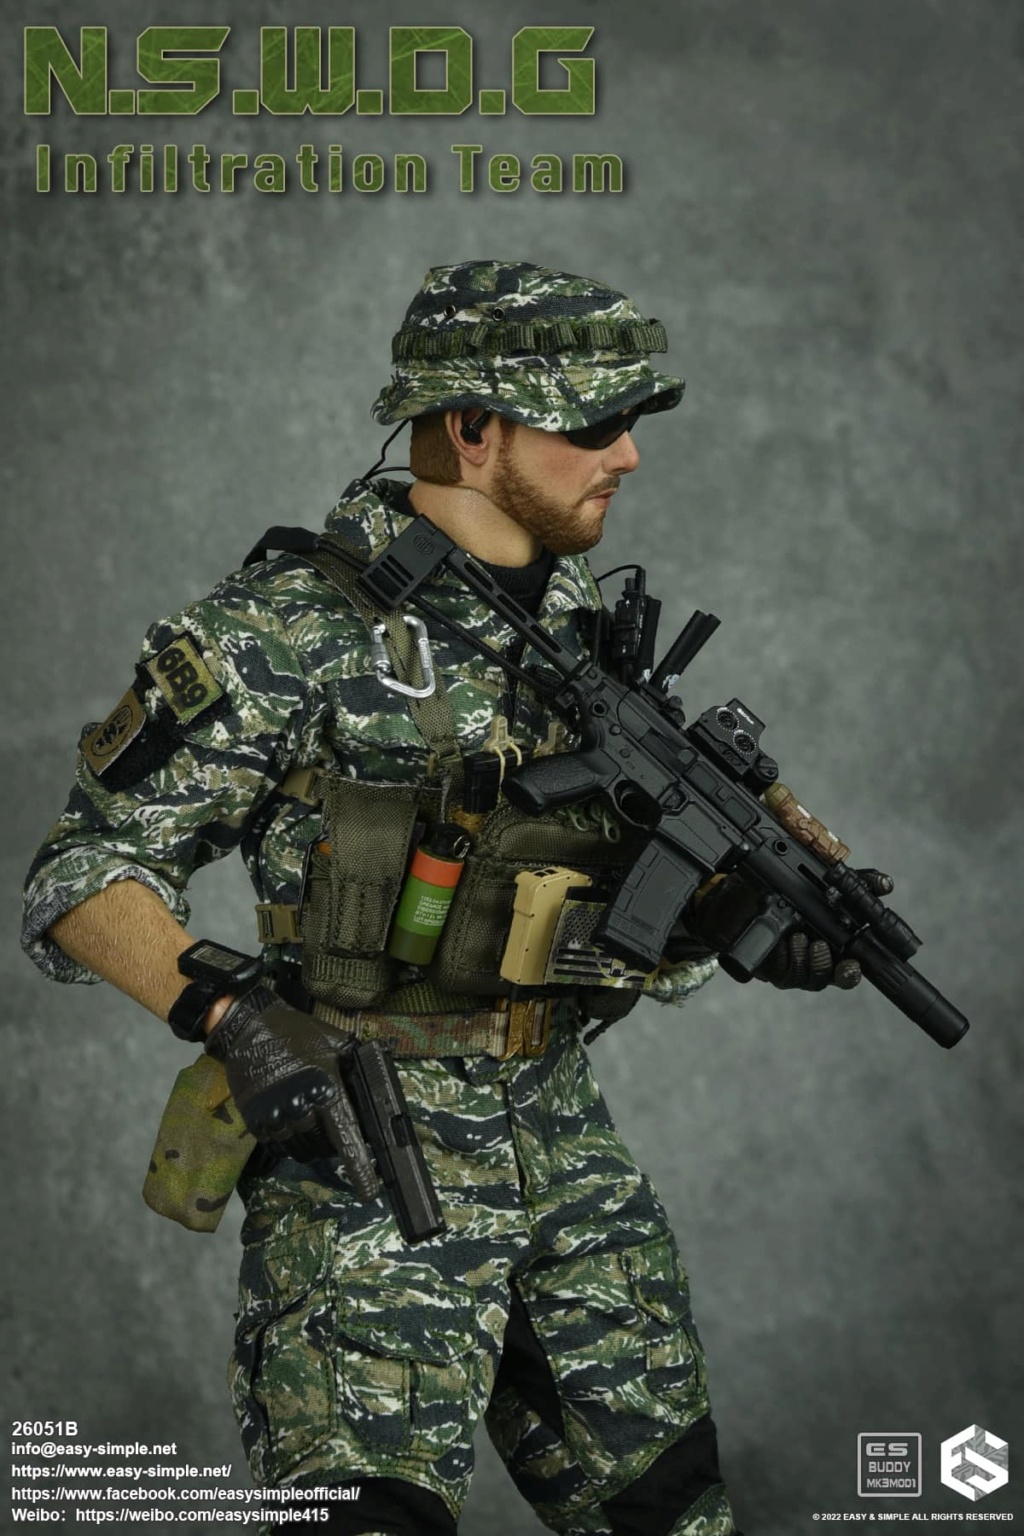 easy - NEW PRODUCT: EASY AND SIMPLE 1/6 SCALE FIGURE: N.S.W.D.G INFILTRATION TEAM - (2 Versions) 10530